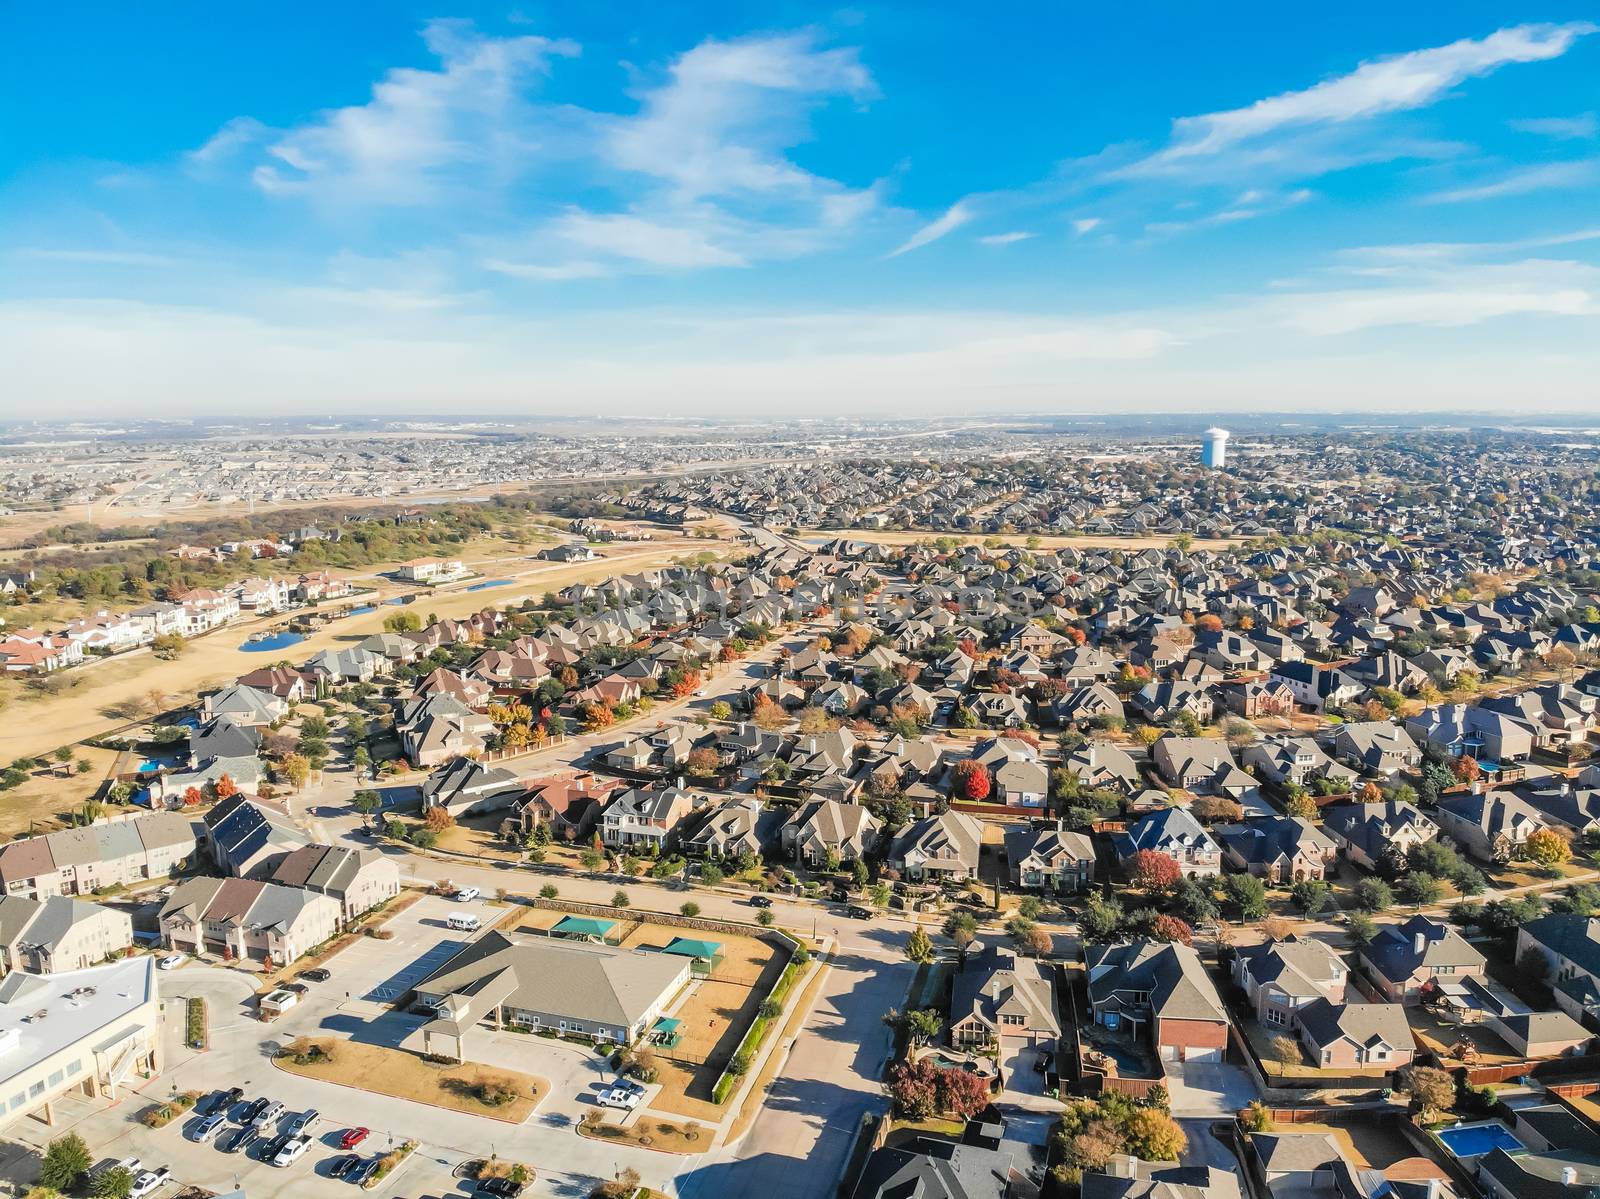 Aerial view new development neighborhood in Cedar Hill, Texas, USA in morning fall with colorful leaves. A city in Dallas and Ellis counties located approximately 16 miles southwest of downtown Dallas